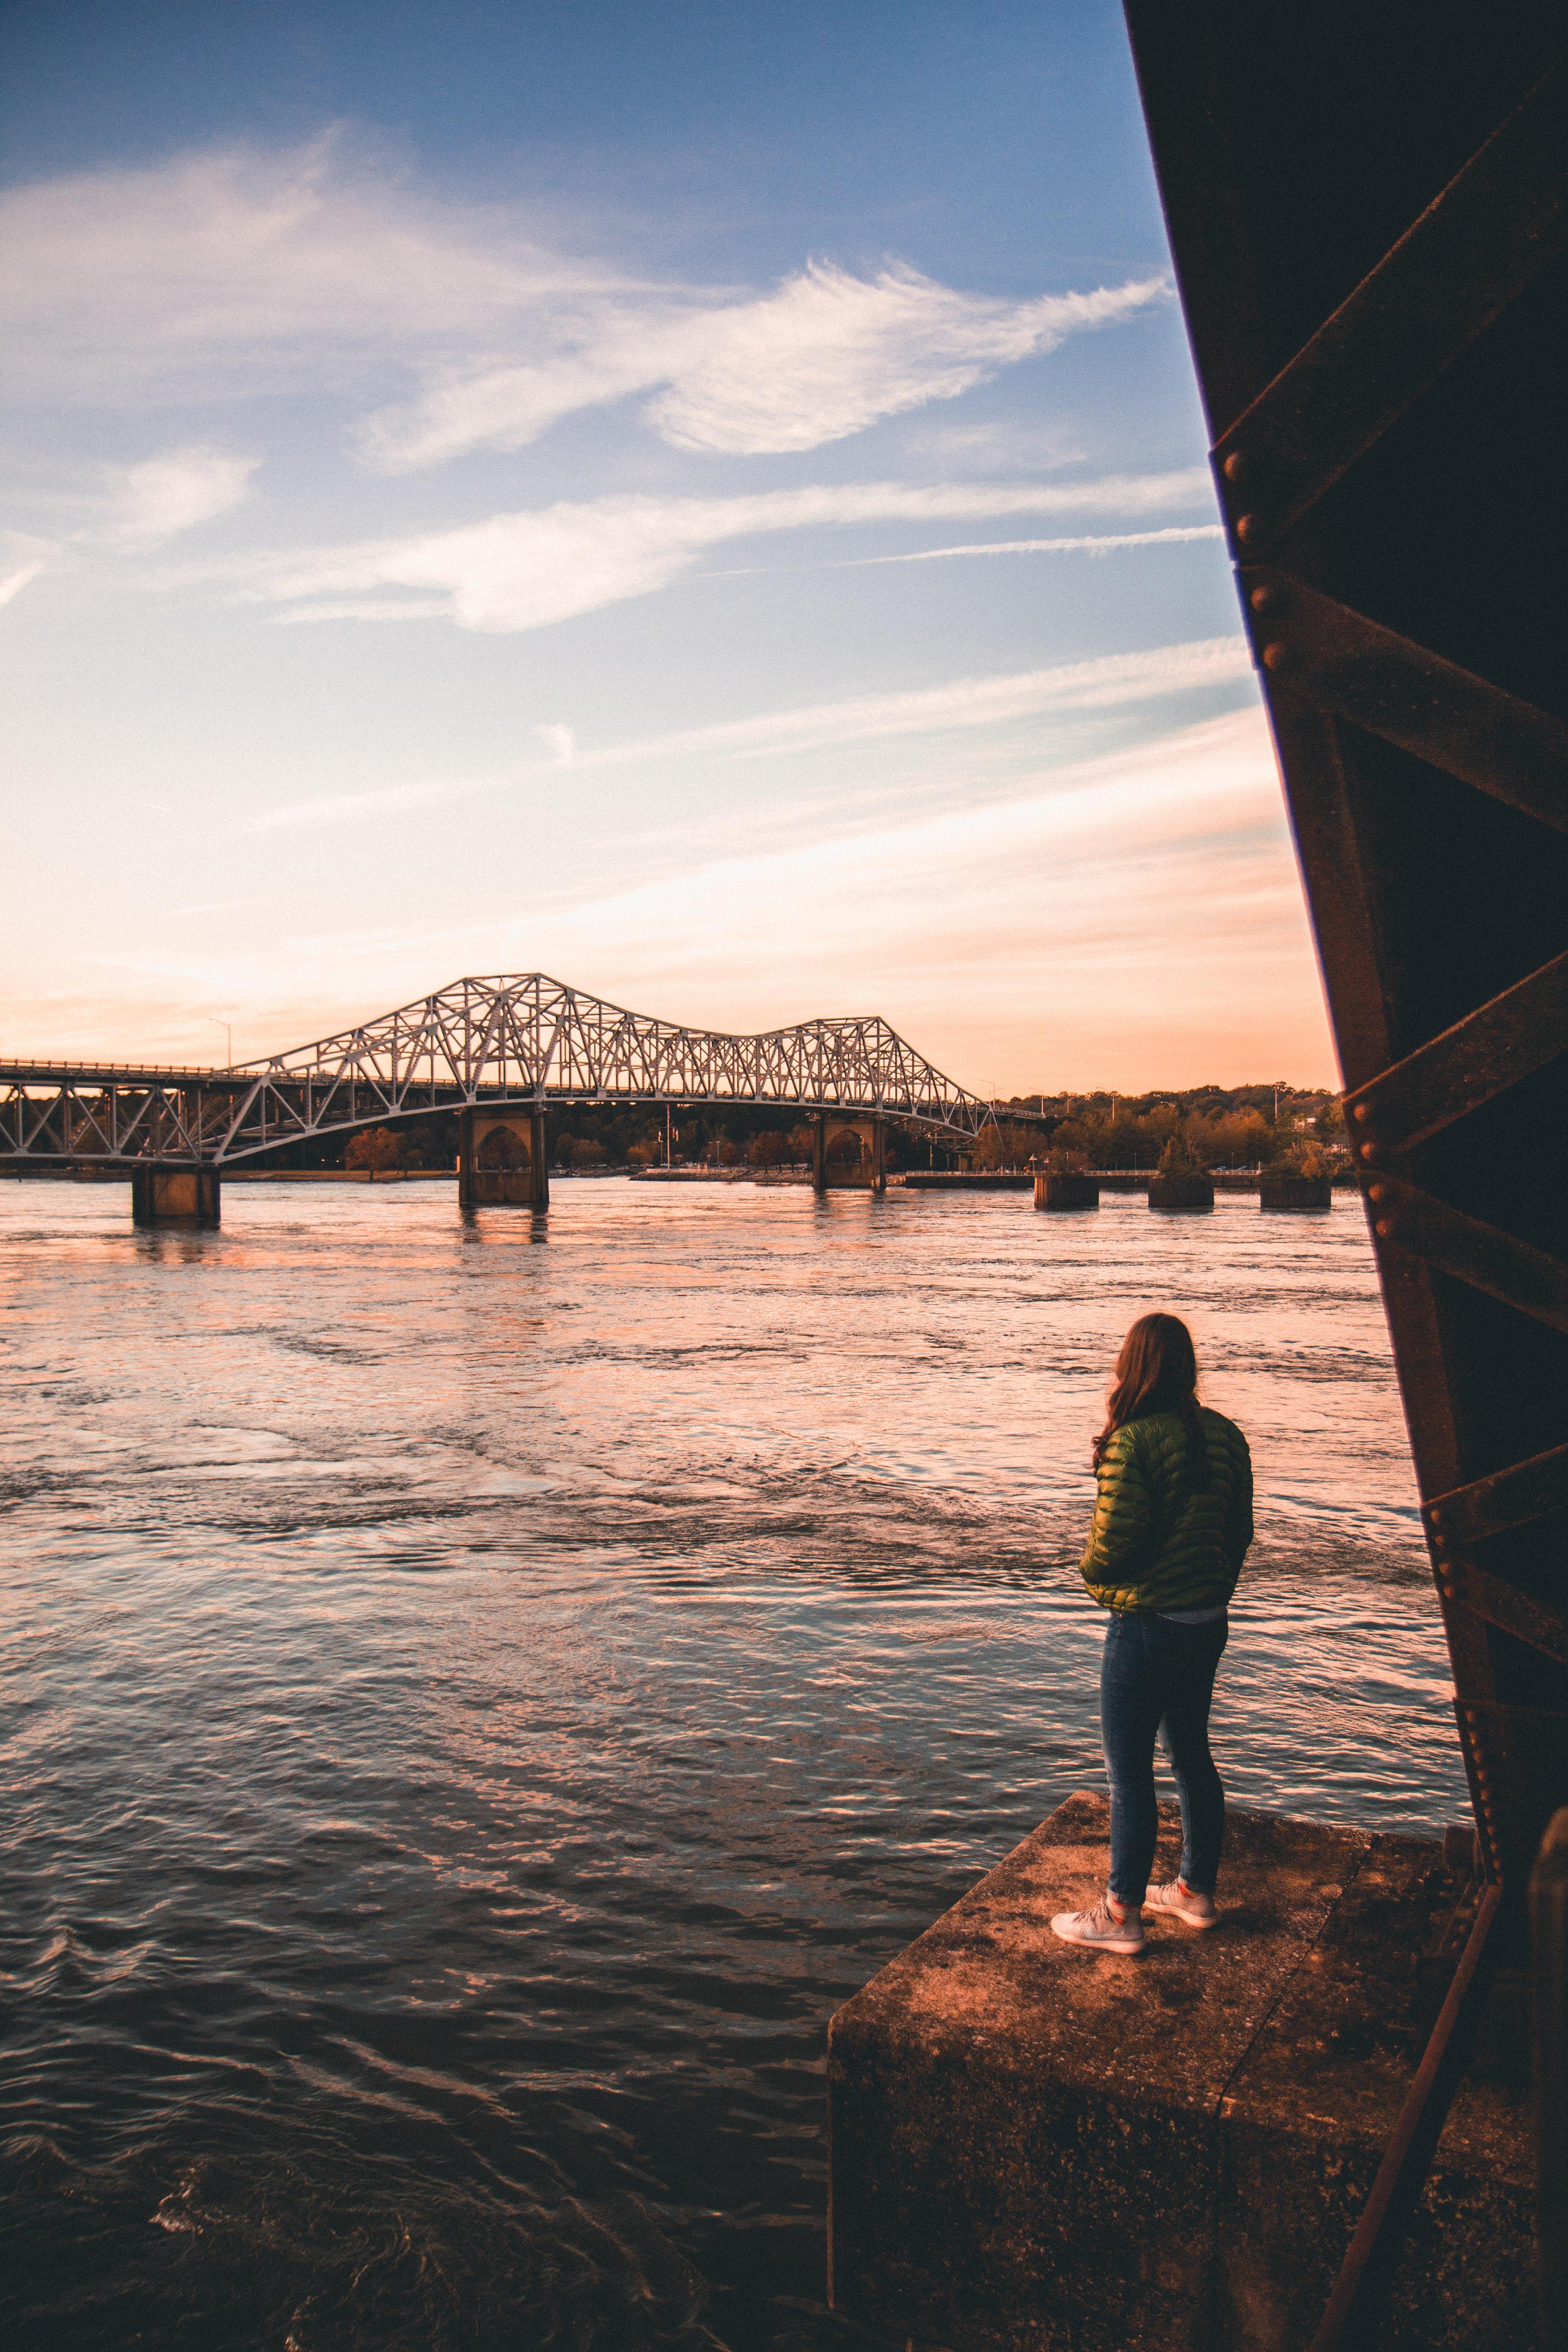 The view of the old railroad bridge in Florence, Alabama.